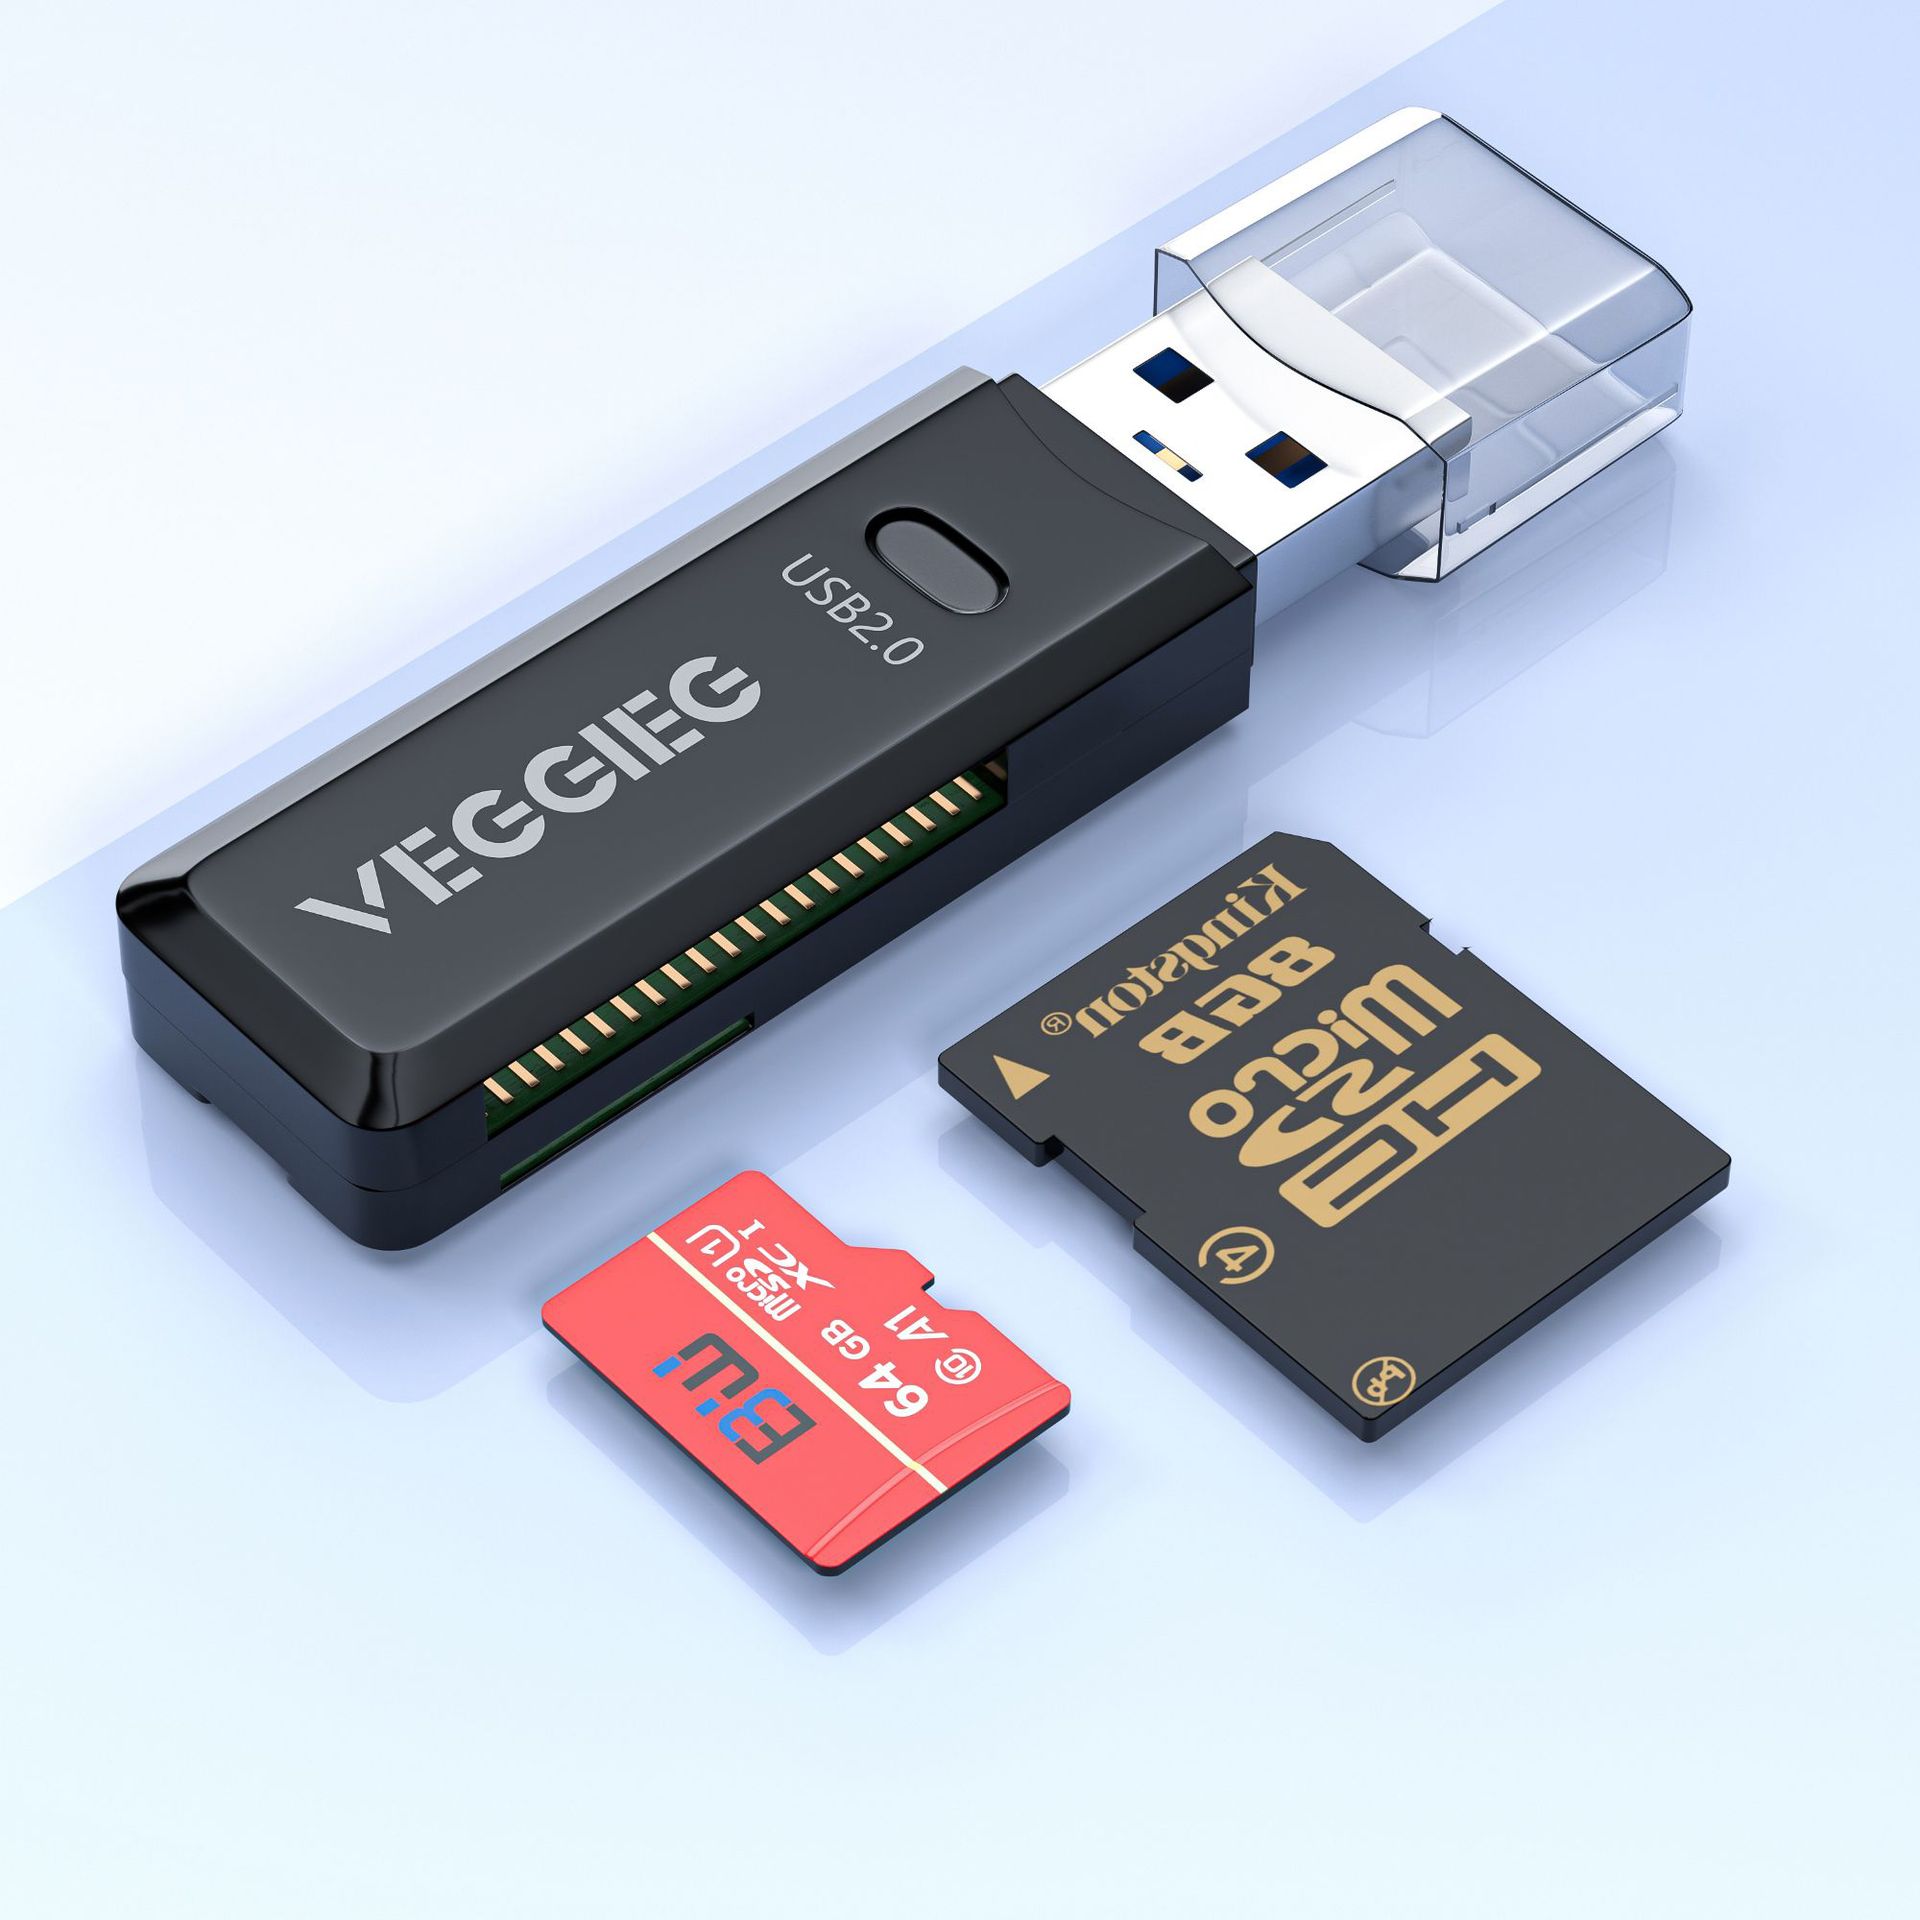 Weige Card Reader Usb3.0 All-in-One Recorder Camera 3.0 Multi-Function High-Speed Tf Mobile Phone Card Sd Card